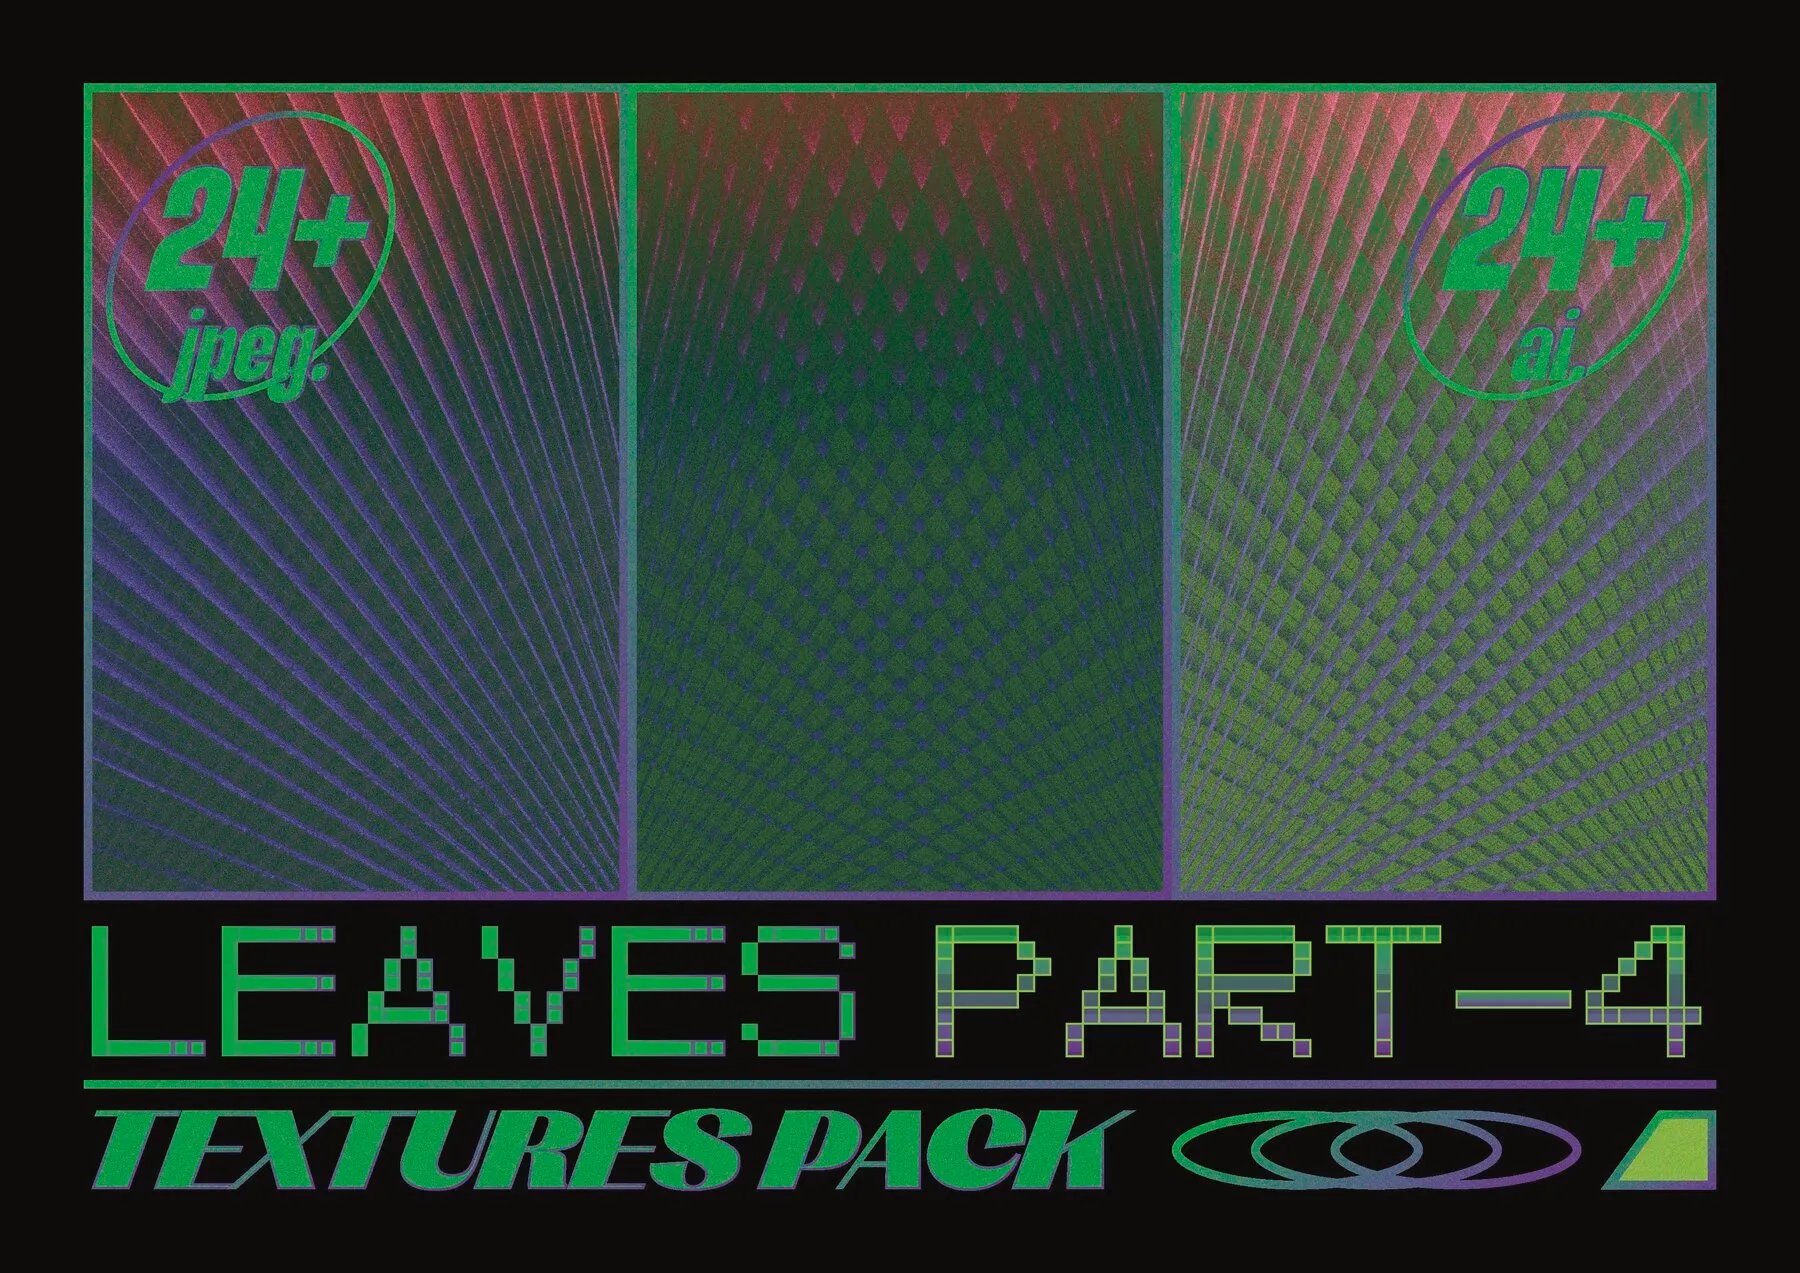 Leaves Part 4 Textures Pack